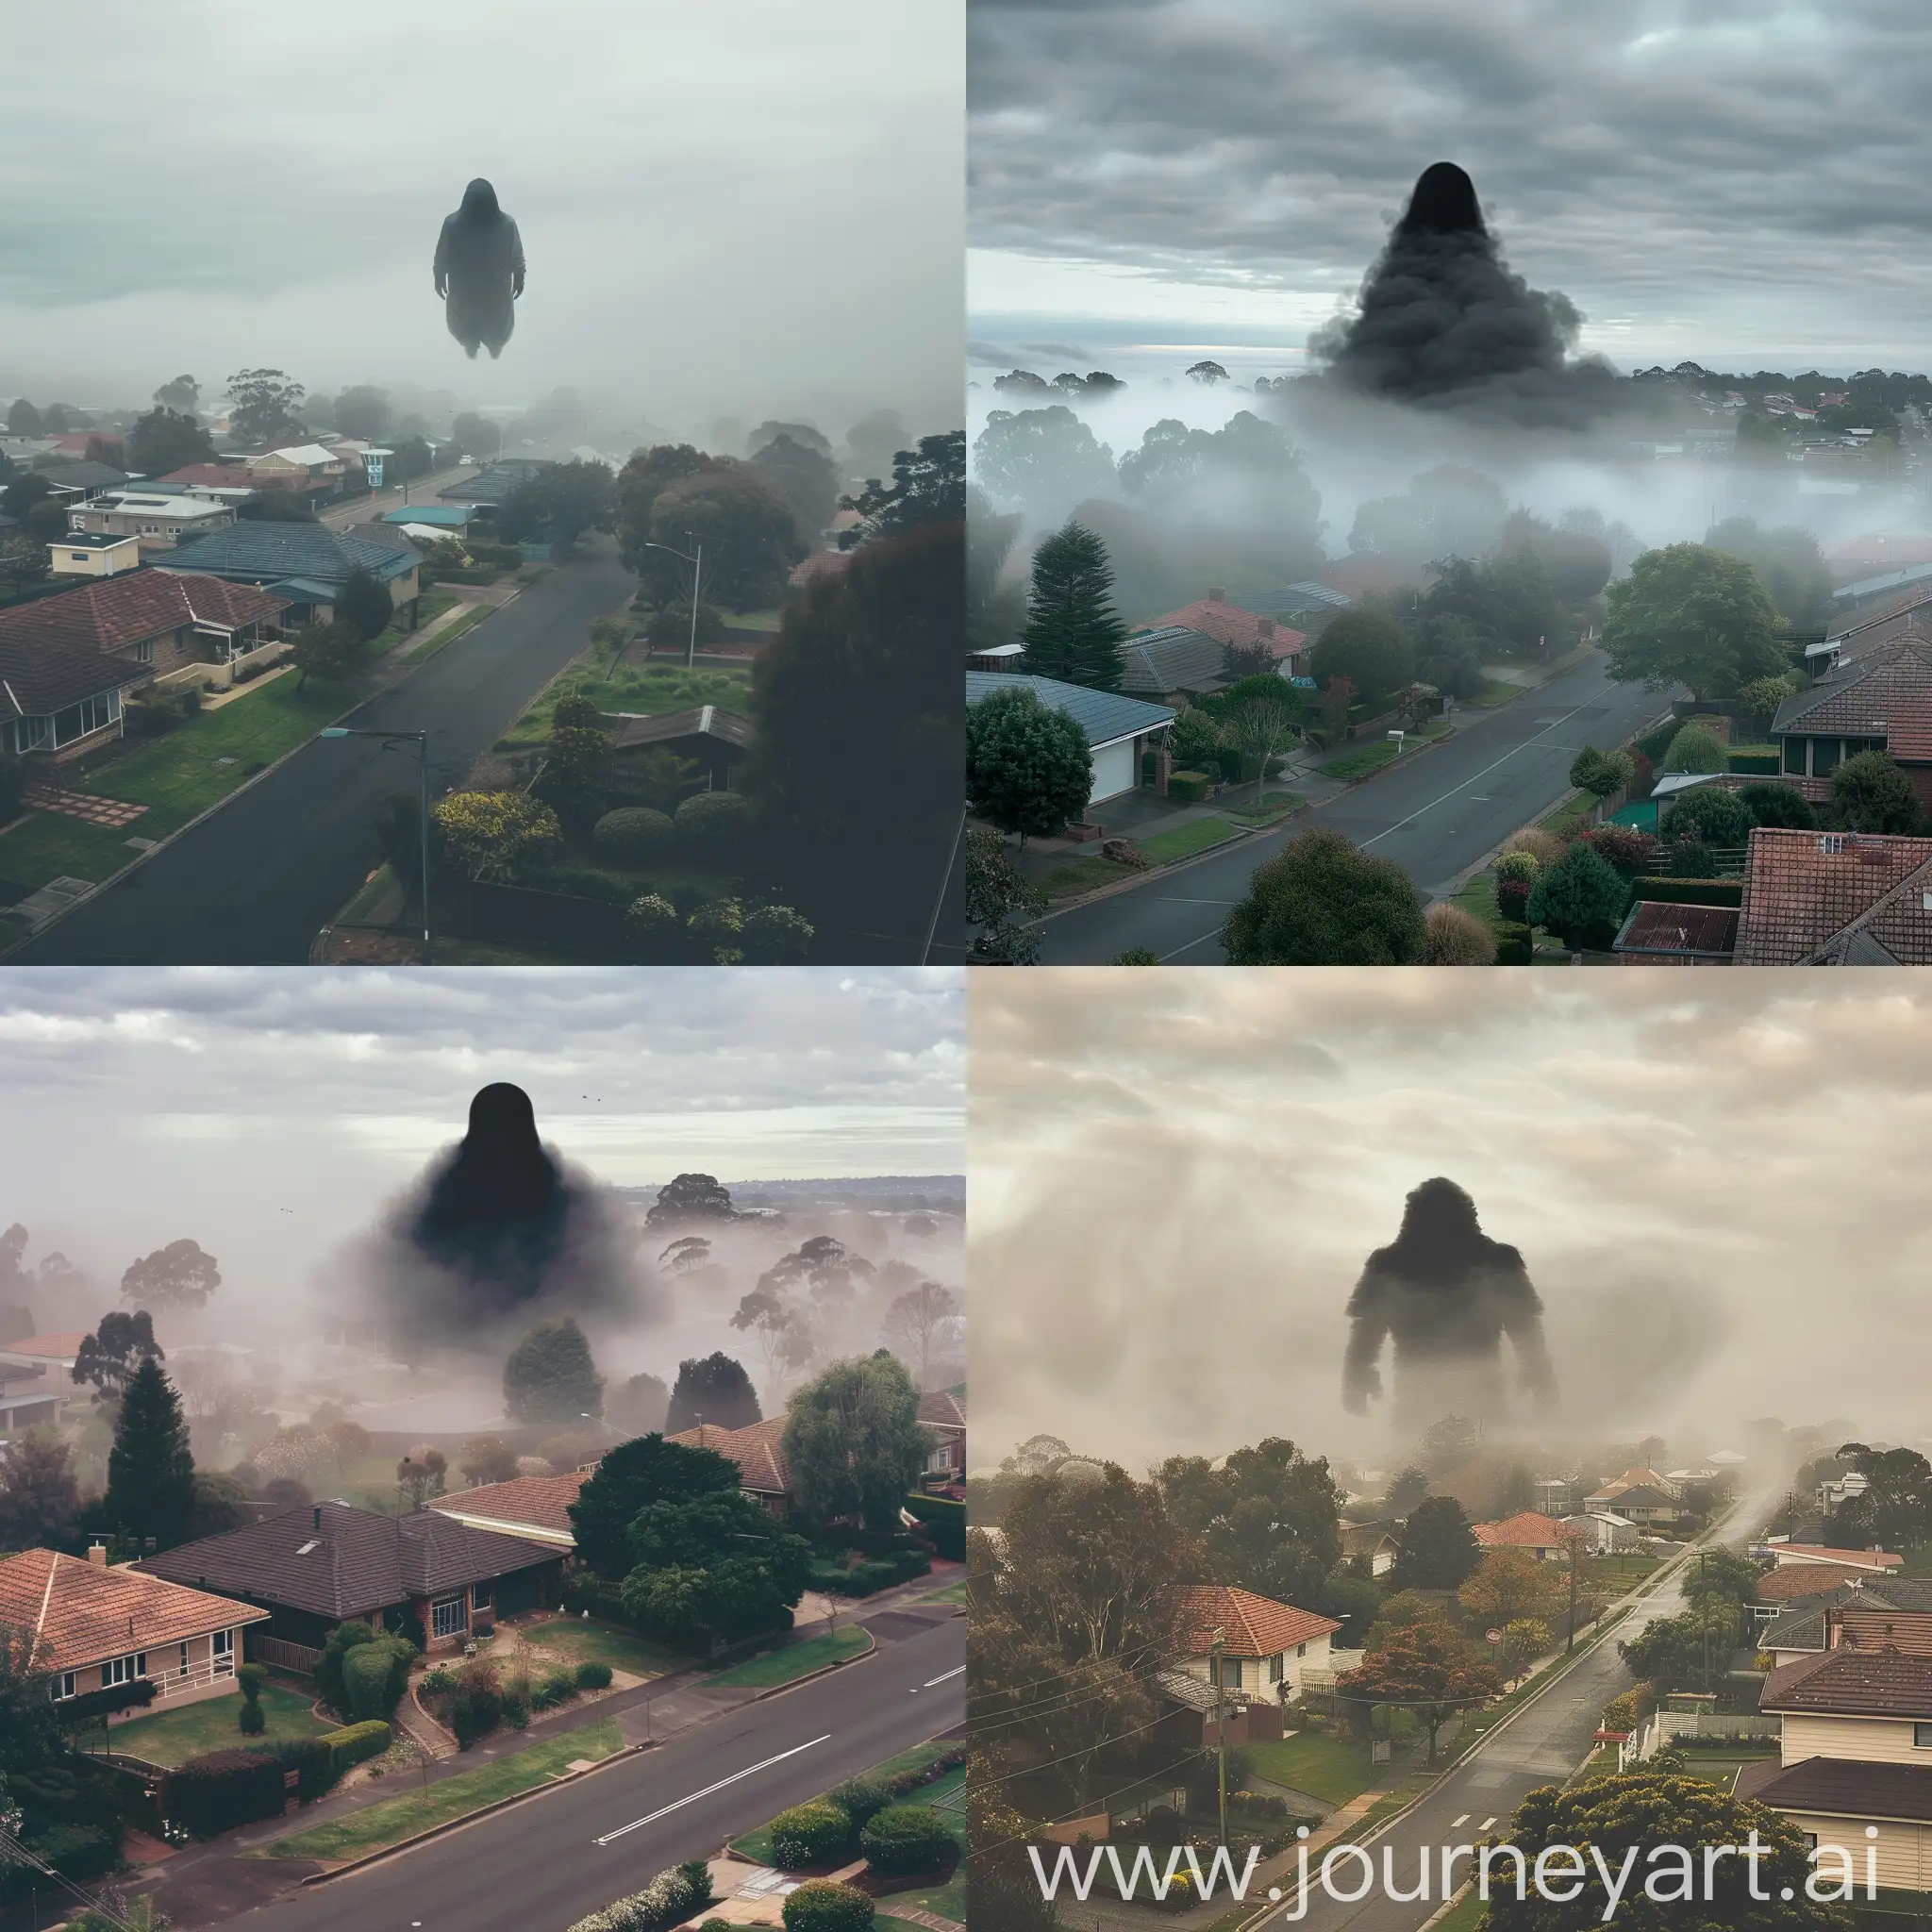 photo of a foggy sprawling black figure floating in a suburb, houses, streets, gardens, trees, foggy skyphoto of a foggy sprawling black figure floating in a suburb, houses, streets, gardens, trees, foggy sky